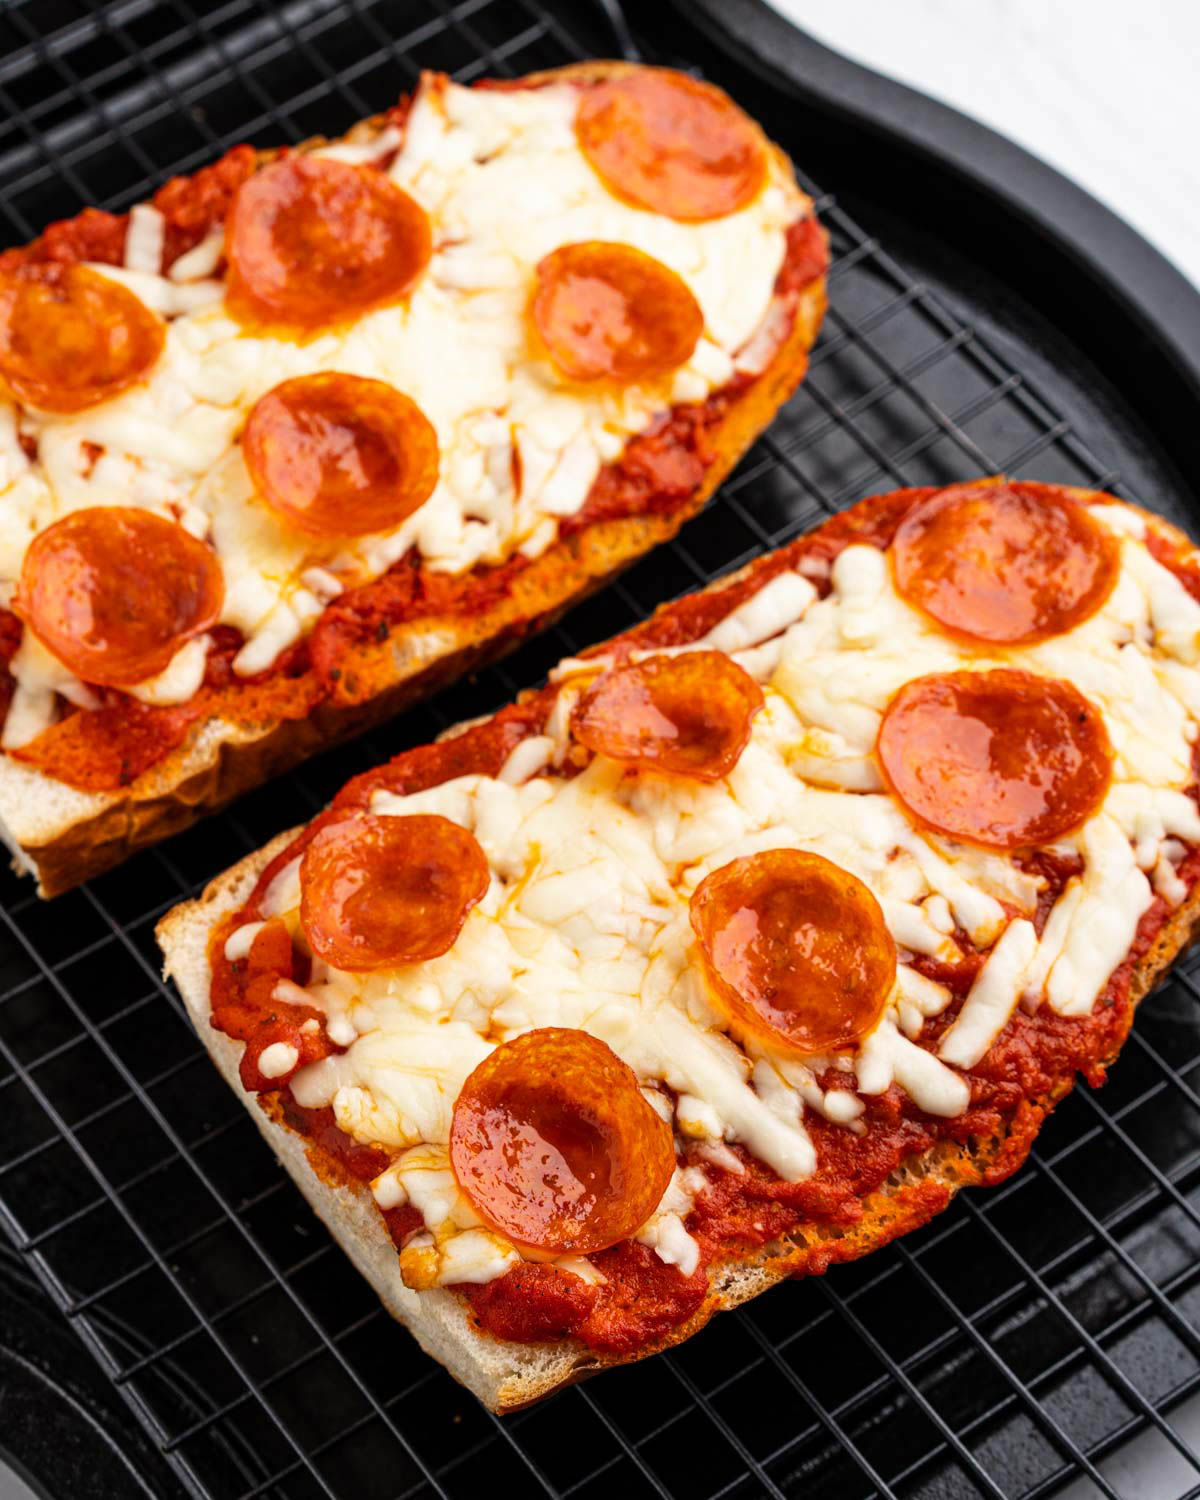 Close up image of two cooked French bread pizzas on a black cooling rack and tray. 